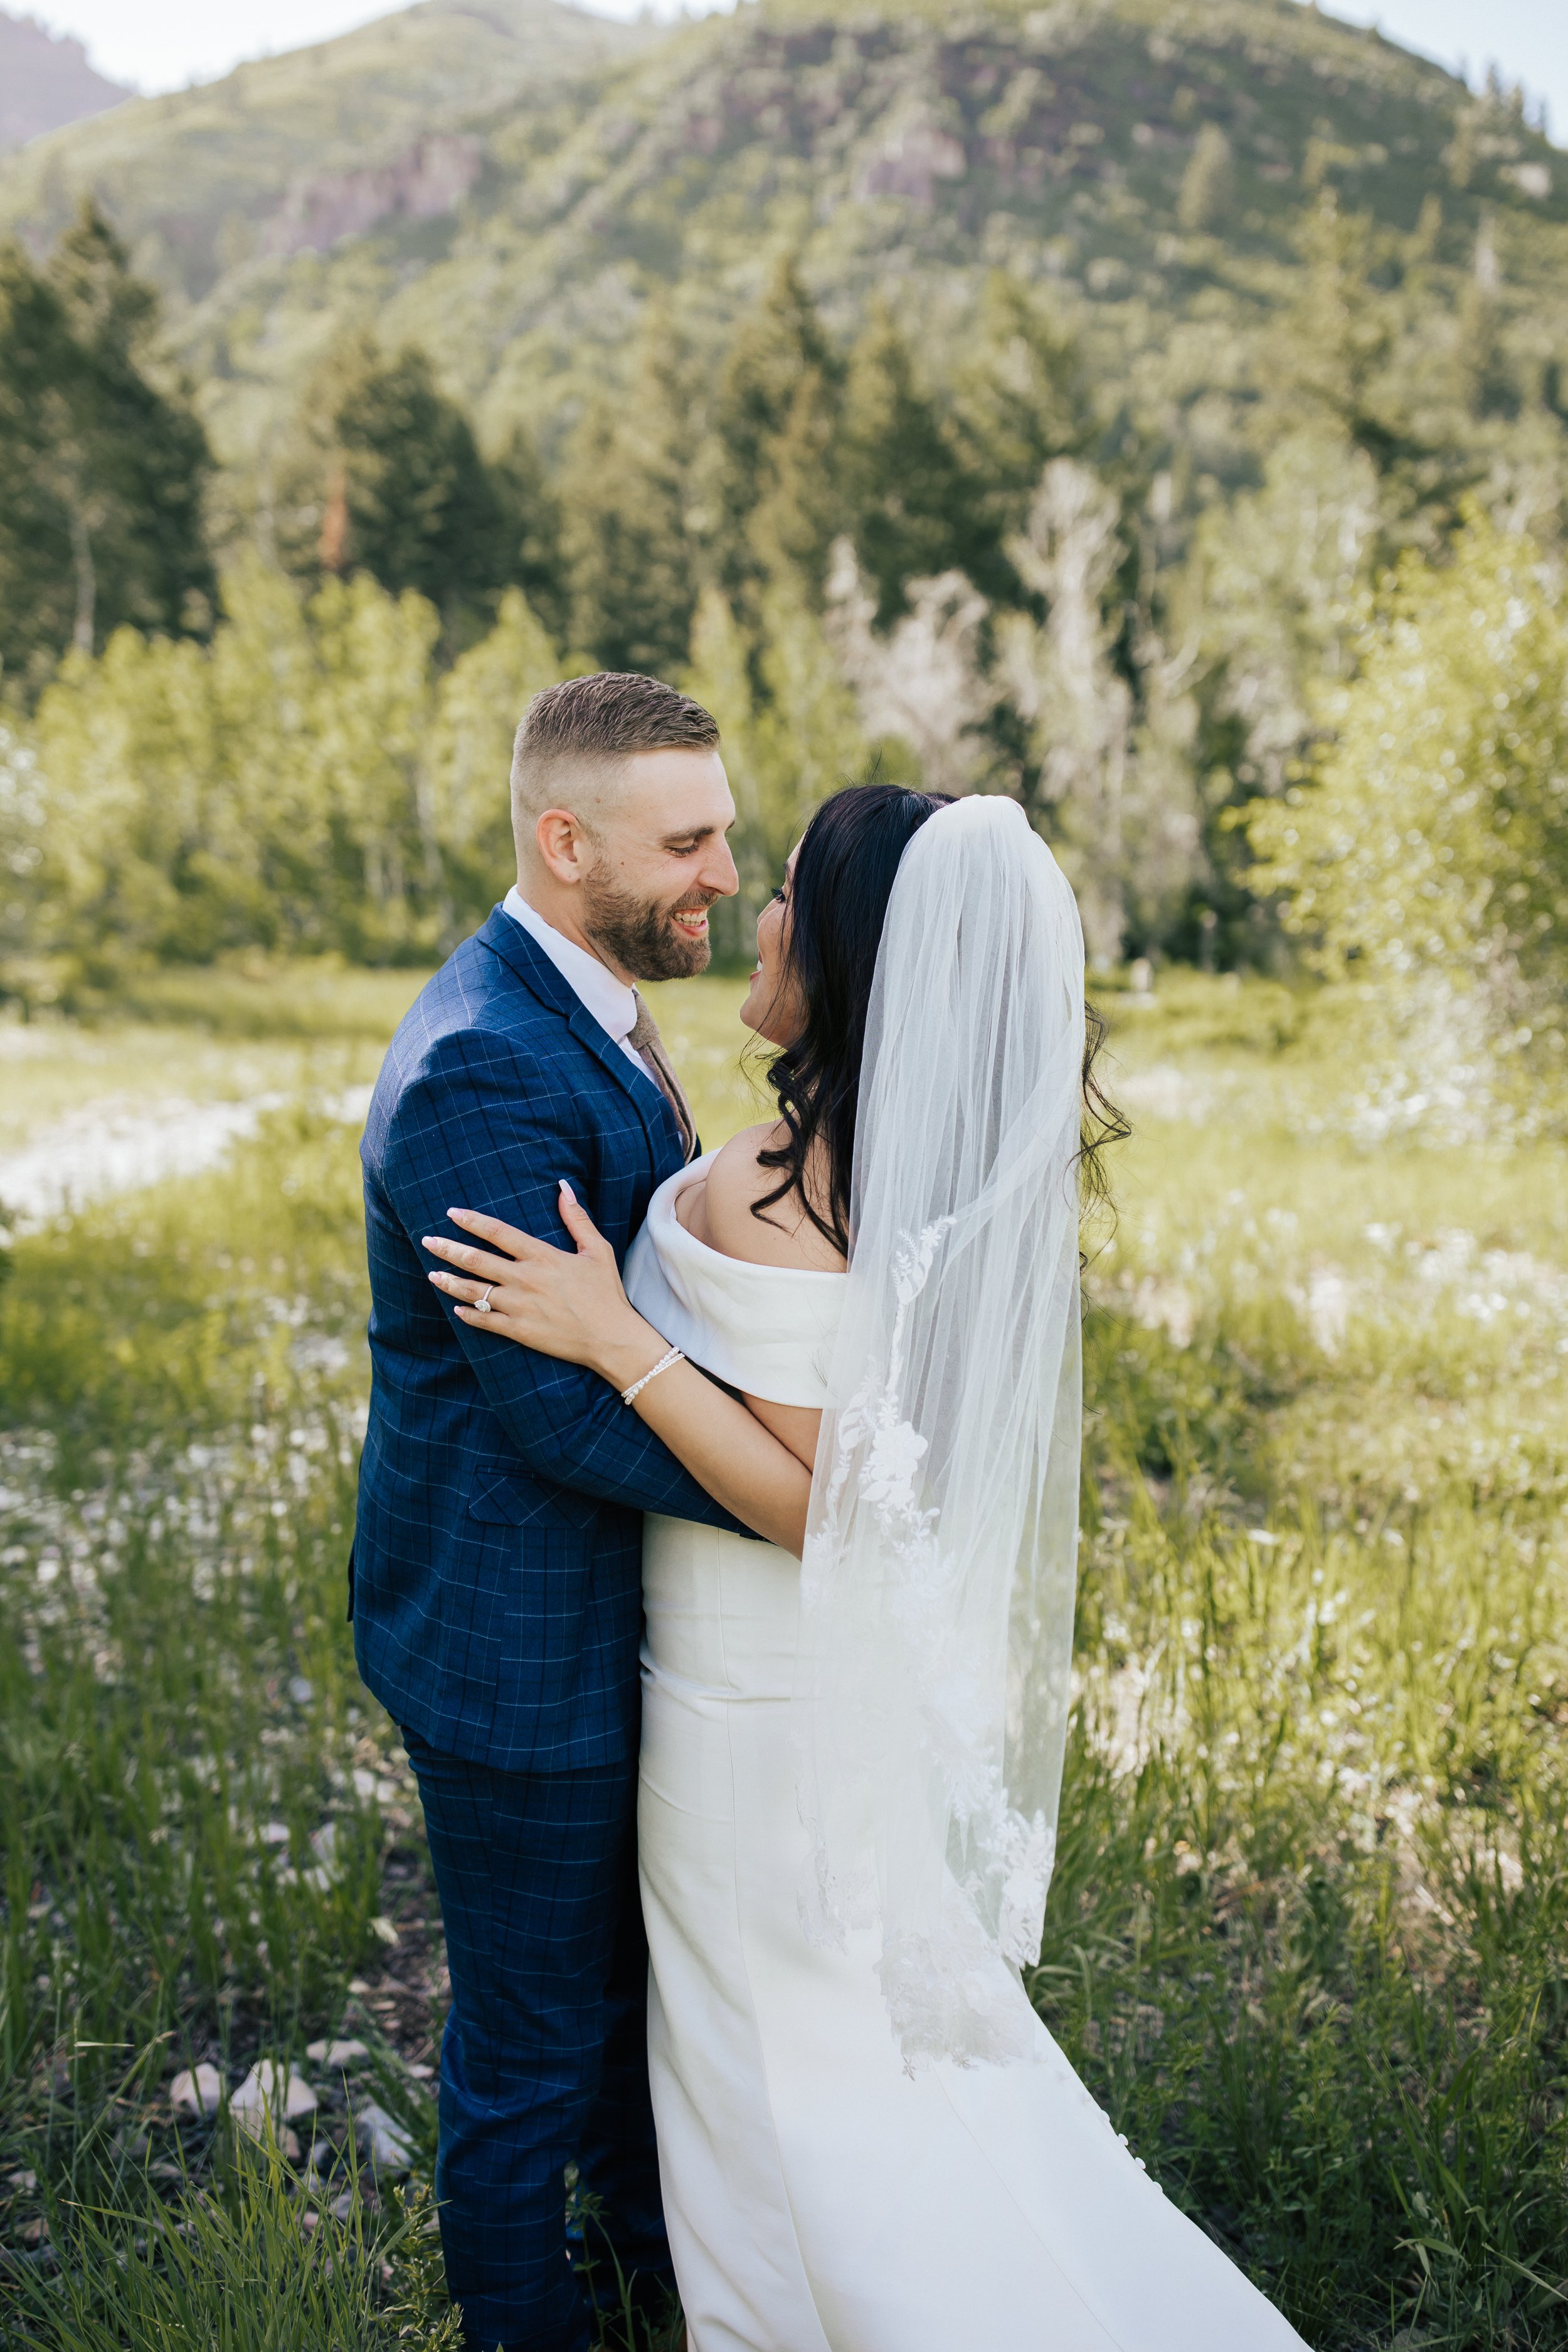  First look session with bride and groom before their wedding ceremony in Aspen Grove, Provo Canyon, Utah. #weddingdress #firstlook #bridalportraits 